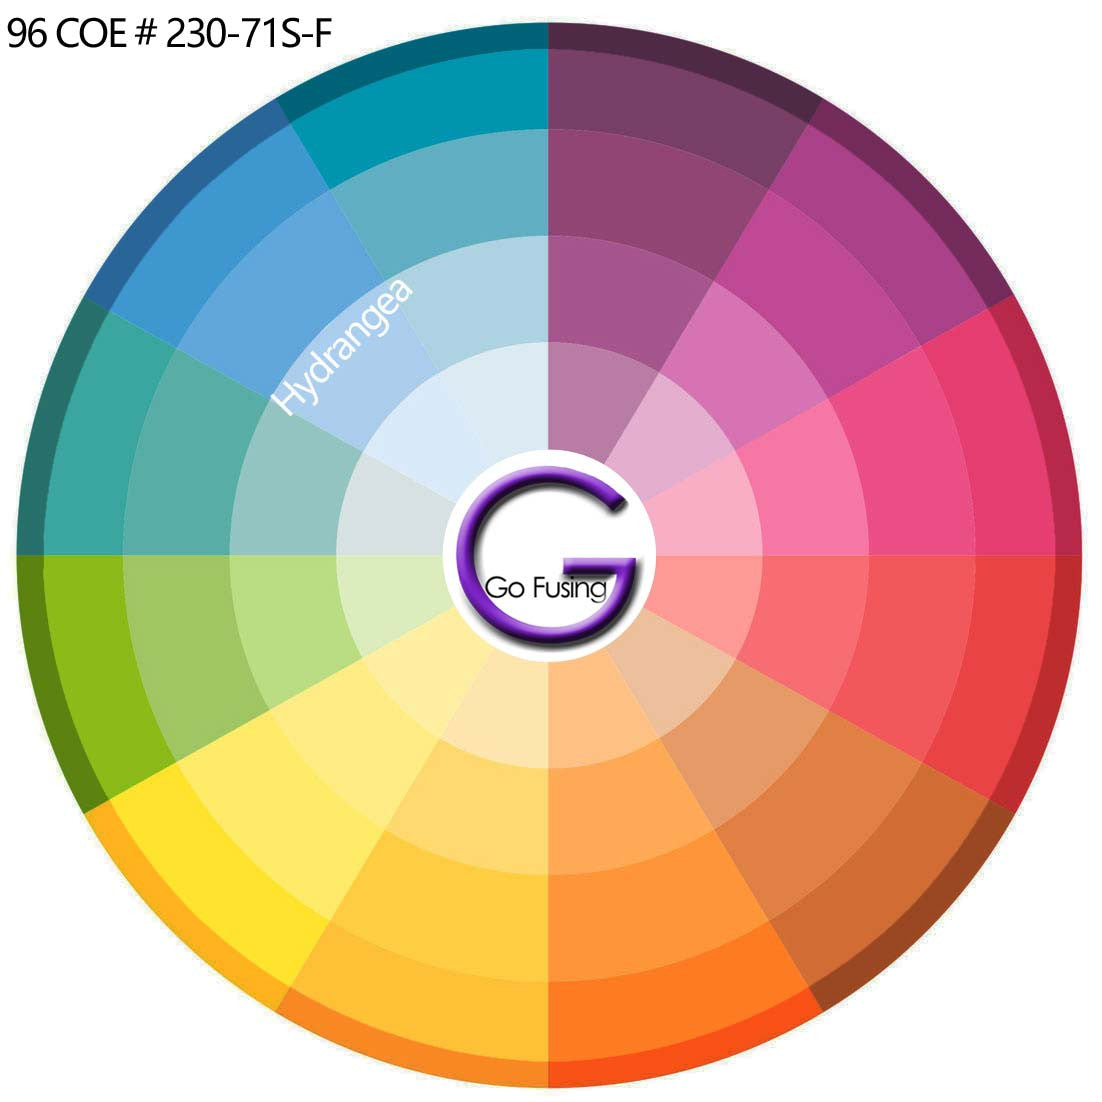 96 COE fusible Hydrangea Opal Glass Frit on a Color Wheel to display Complimentary and Contrasting colors, 230-71S-F